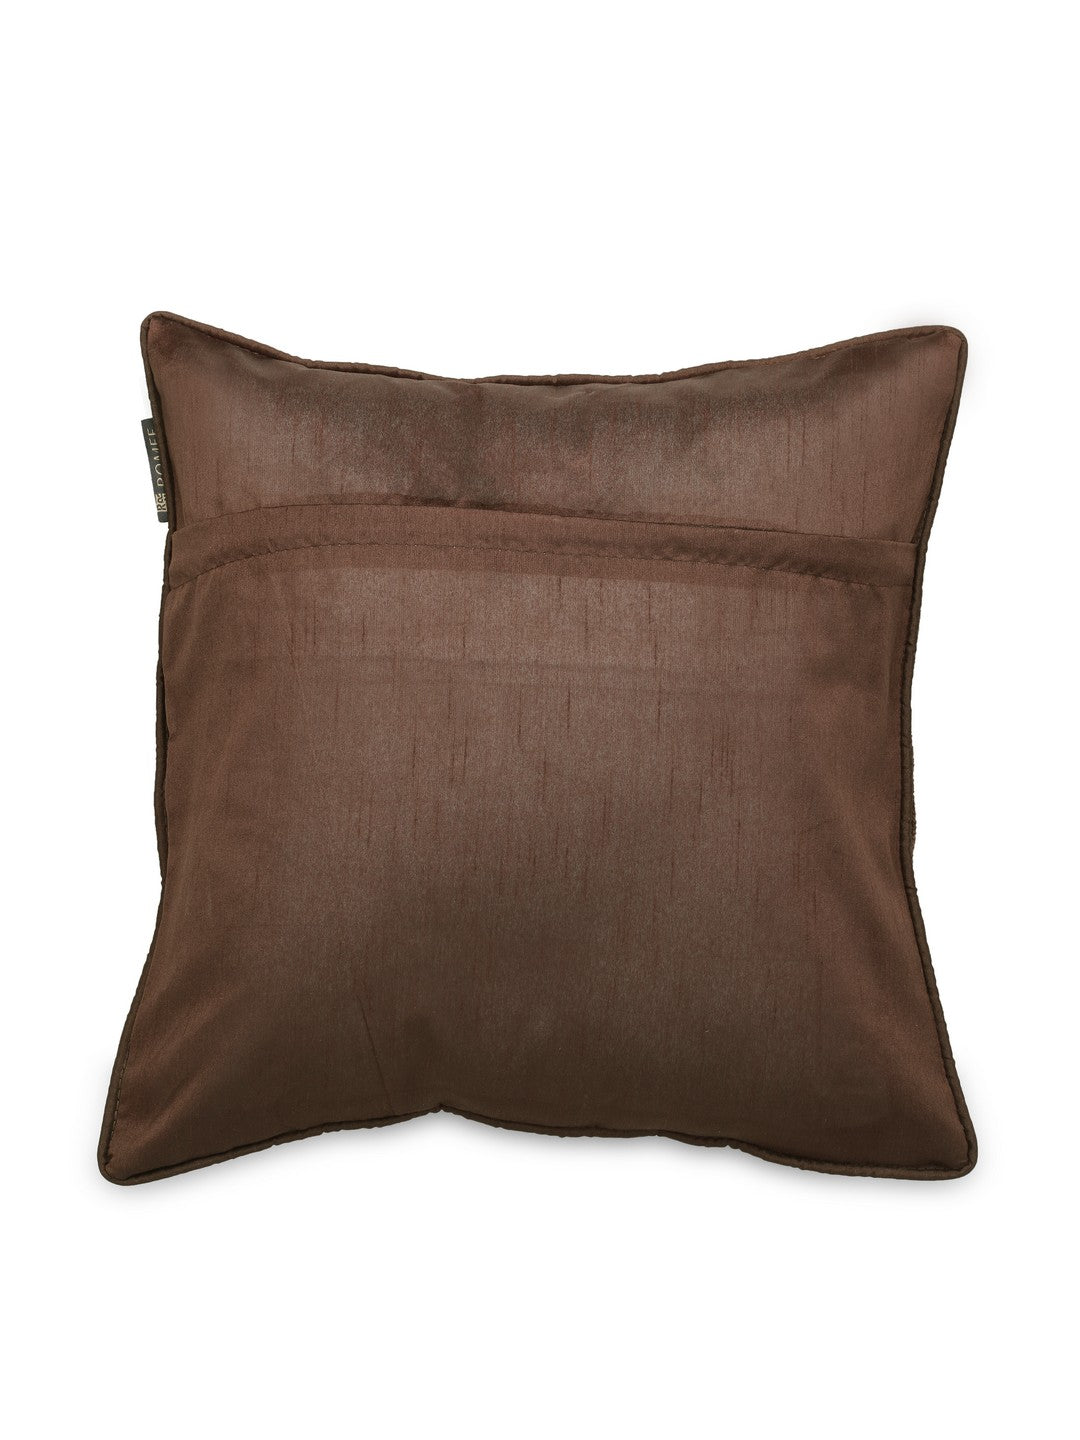 Cotton Chenille Fabric Albert Cushion Cover (16x16inch, Brown) - Set of 5